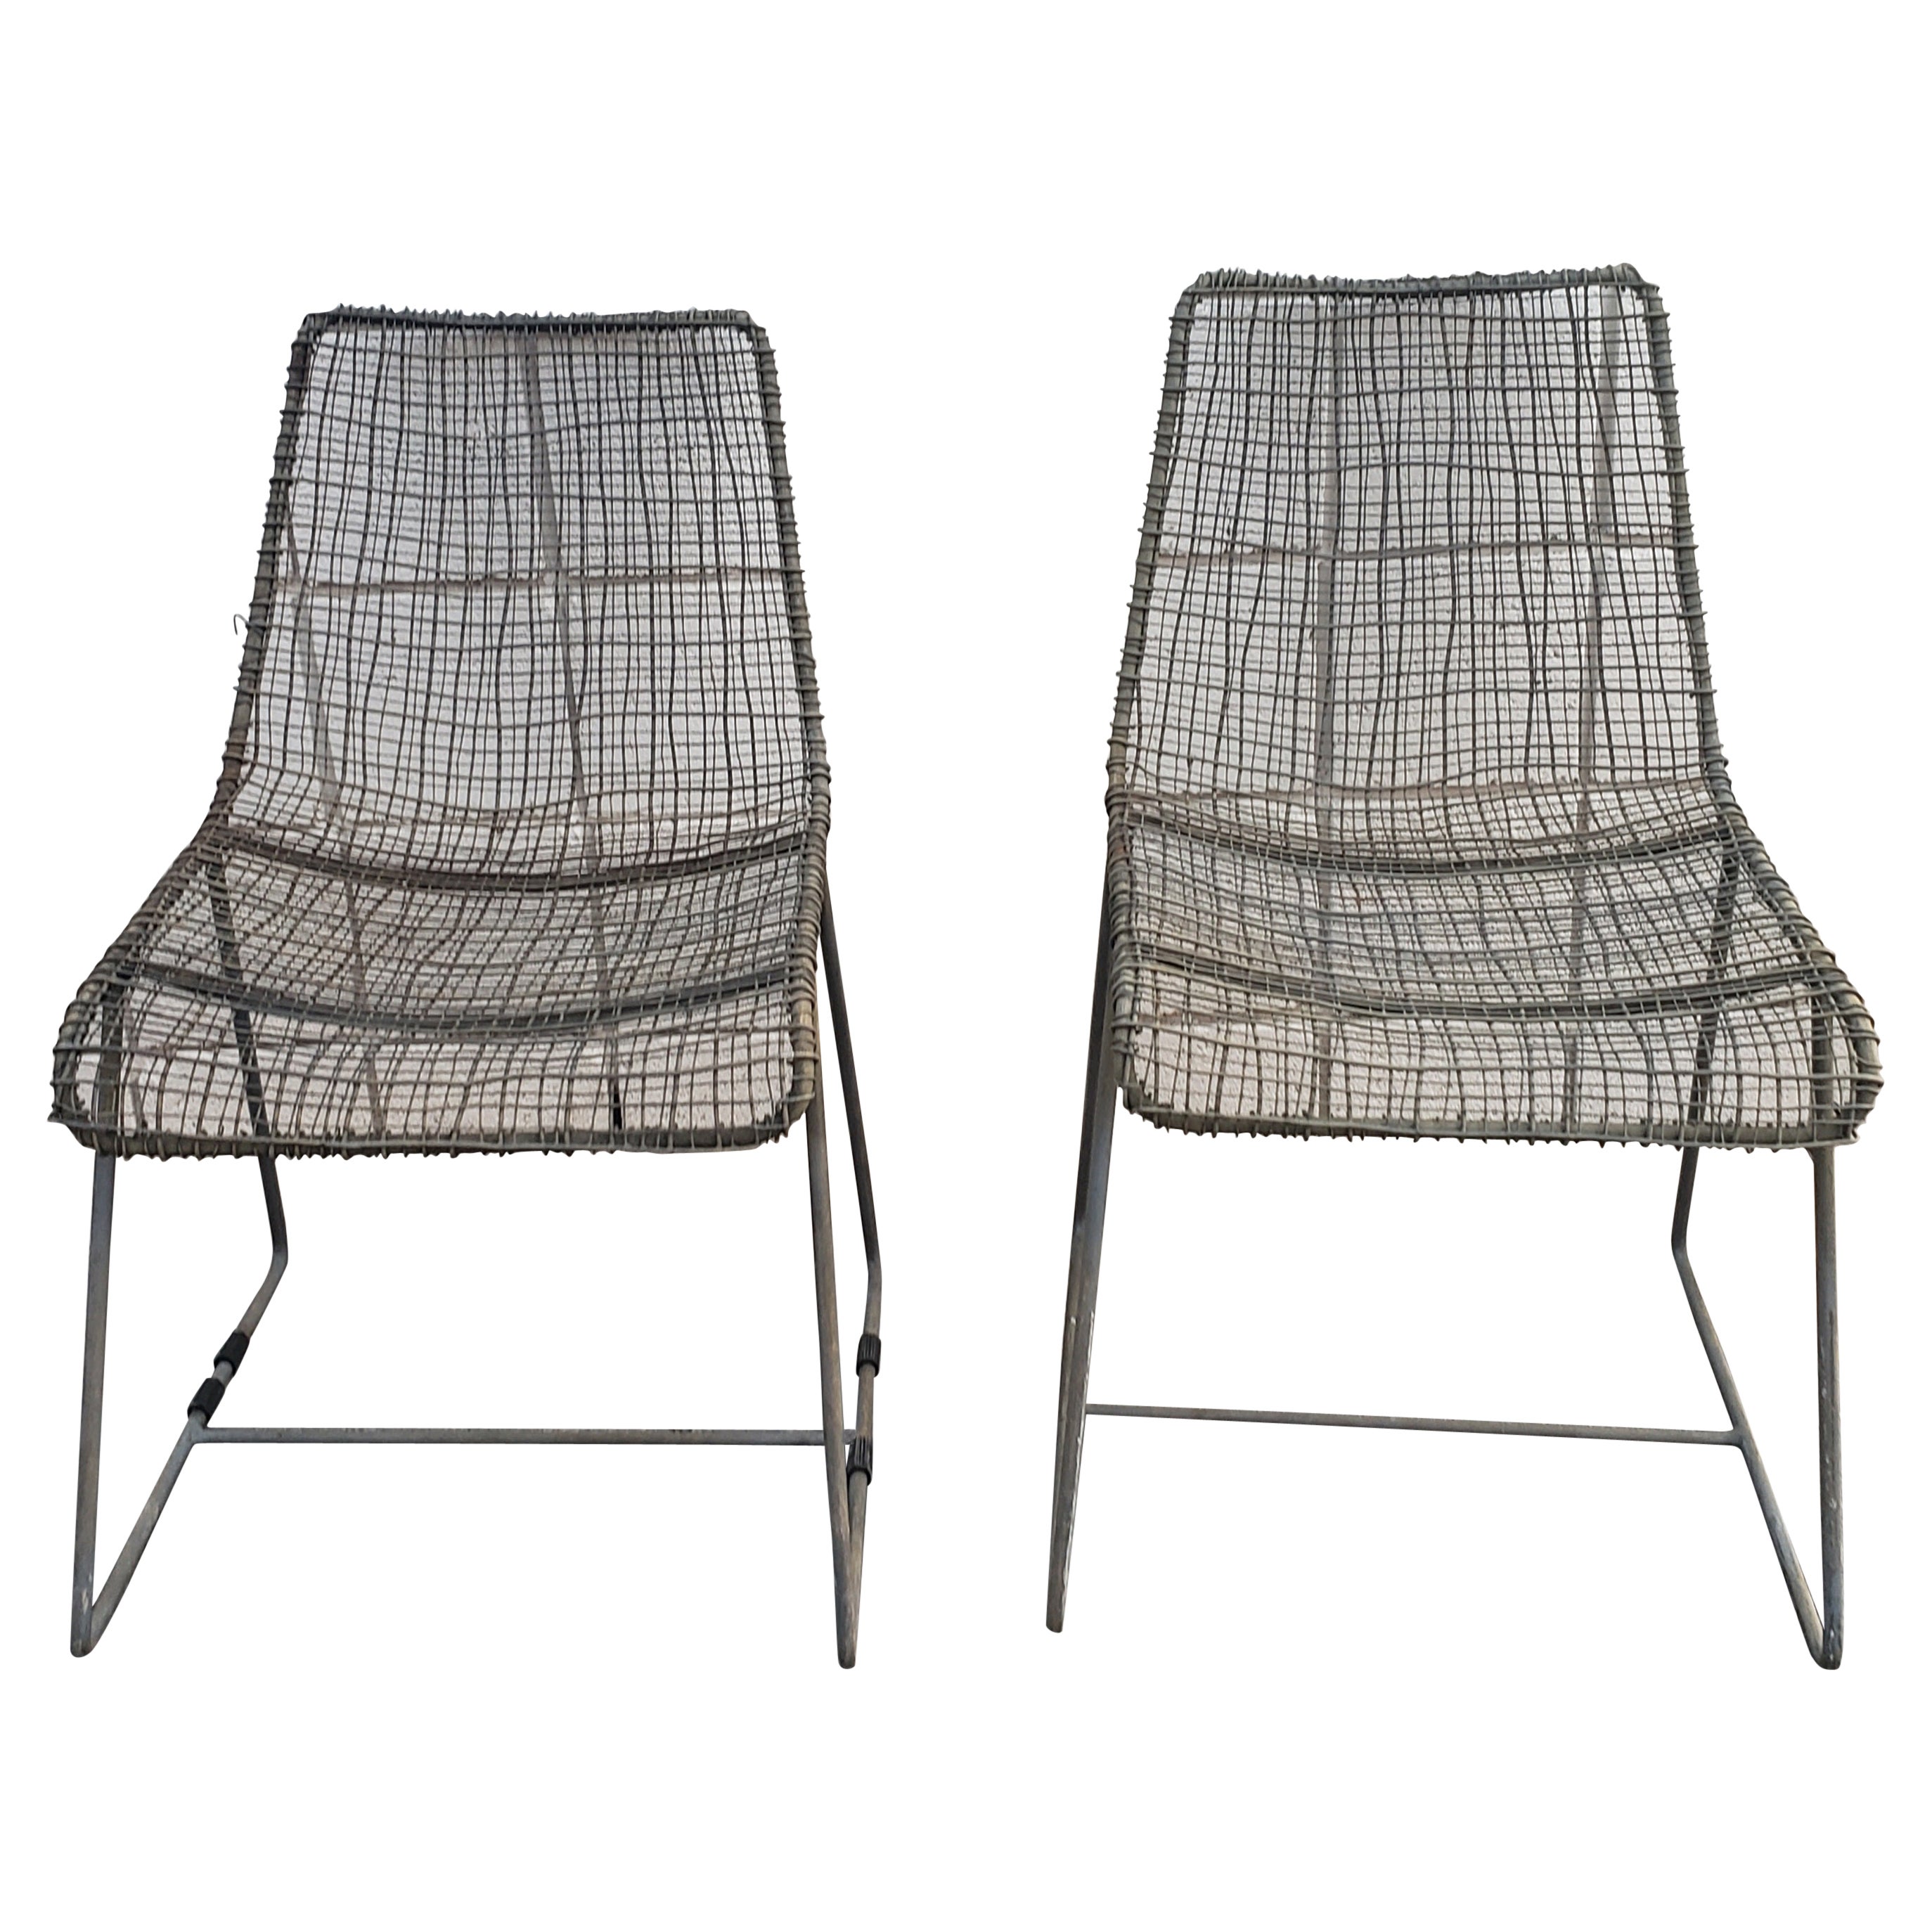 1970s Slope Wrought Iron and Steel Mesh Lounge Chairs, a Pair For Sale